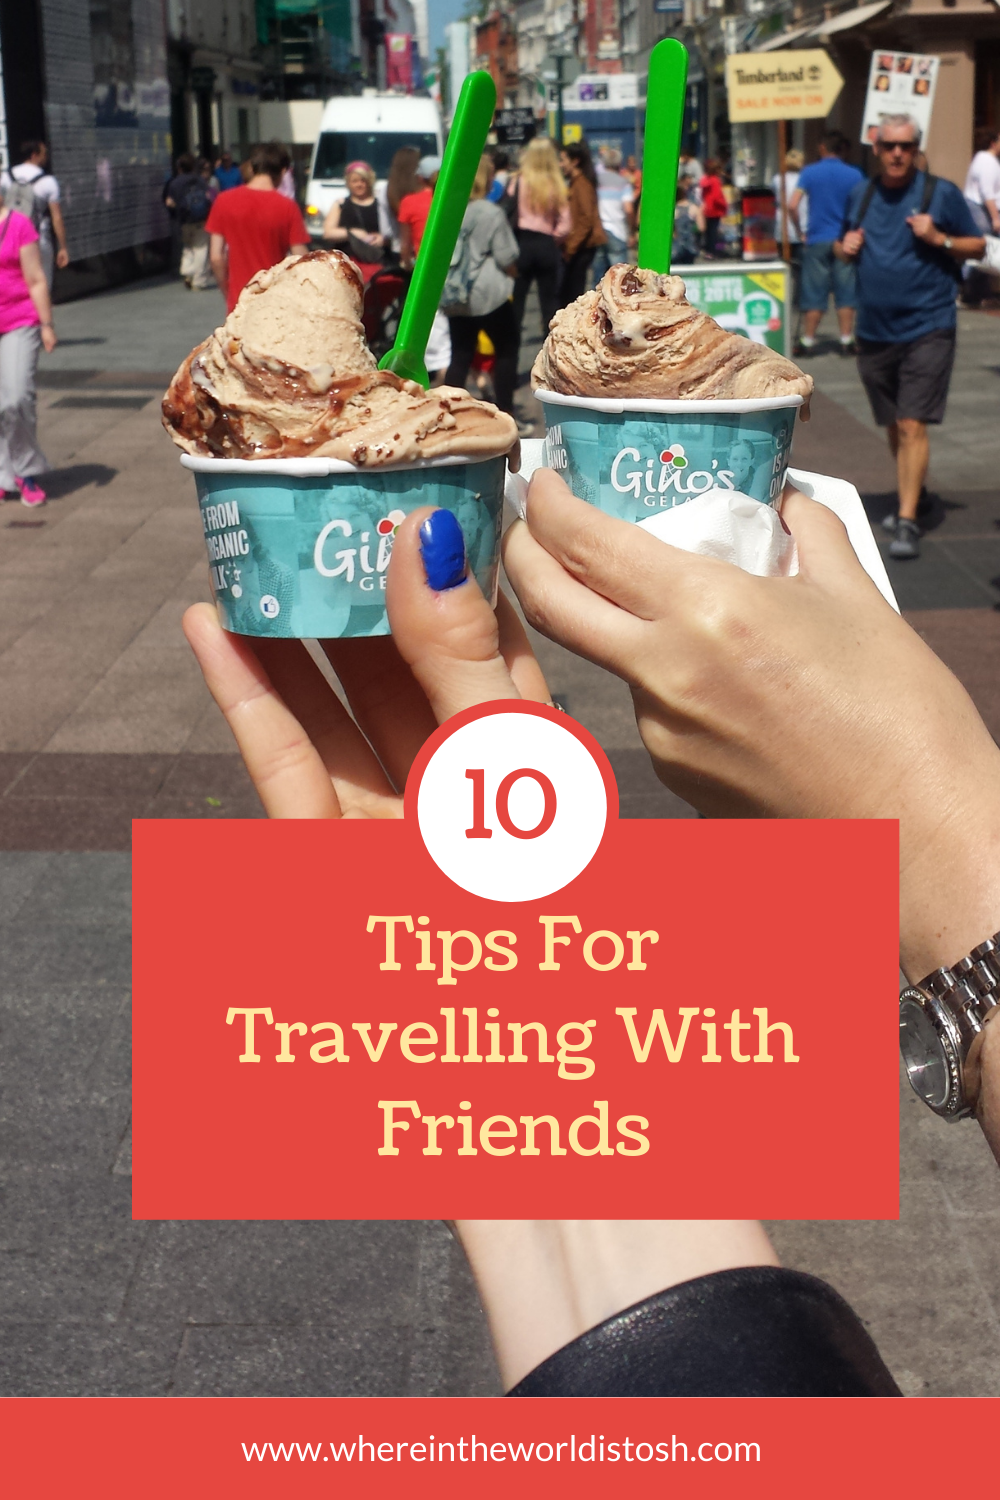 10 Tips For Travelling With Friends